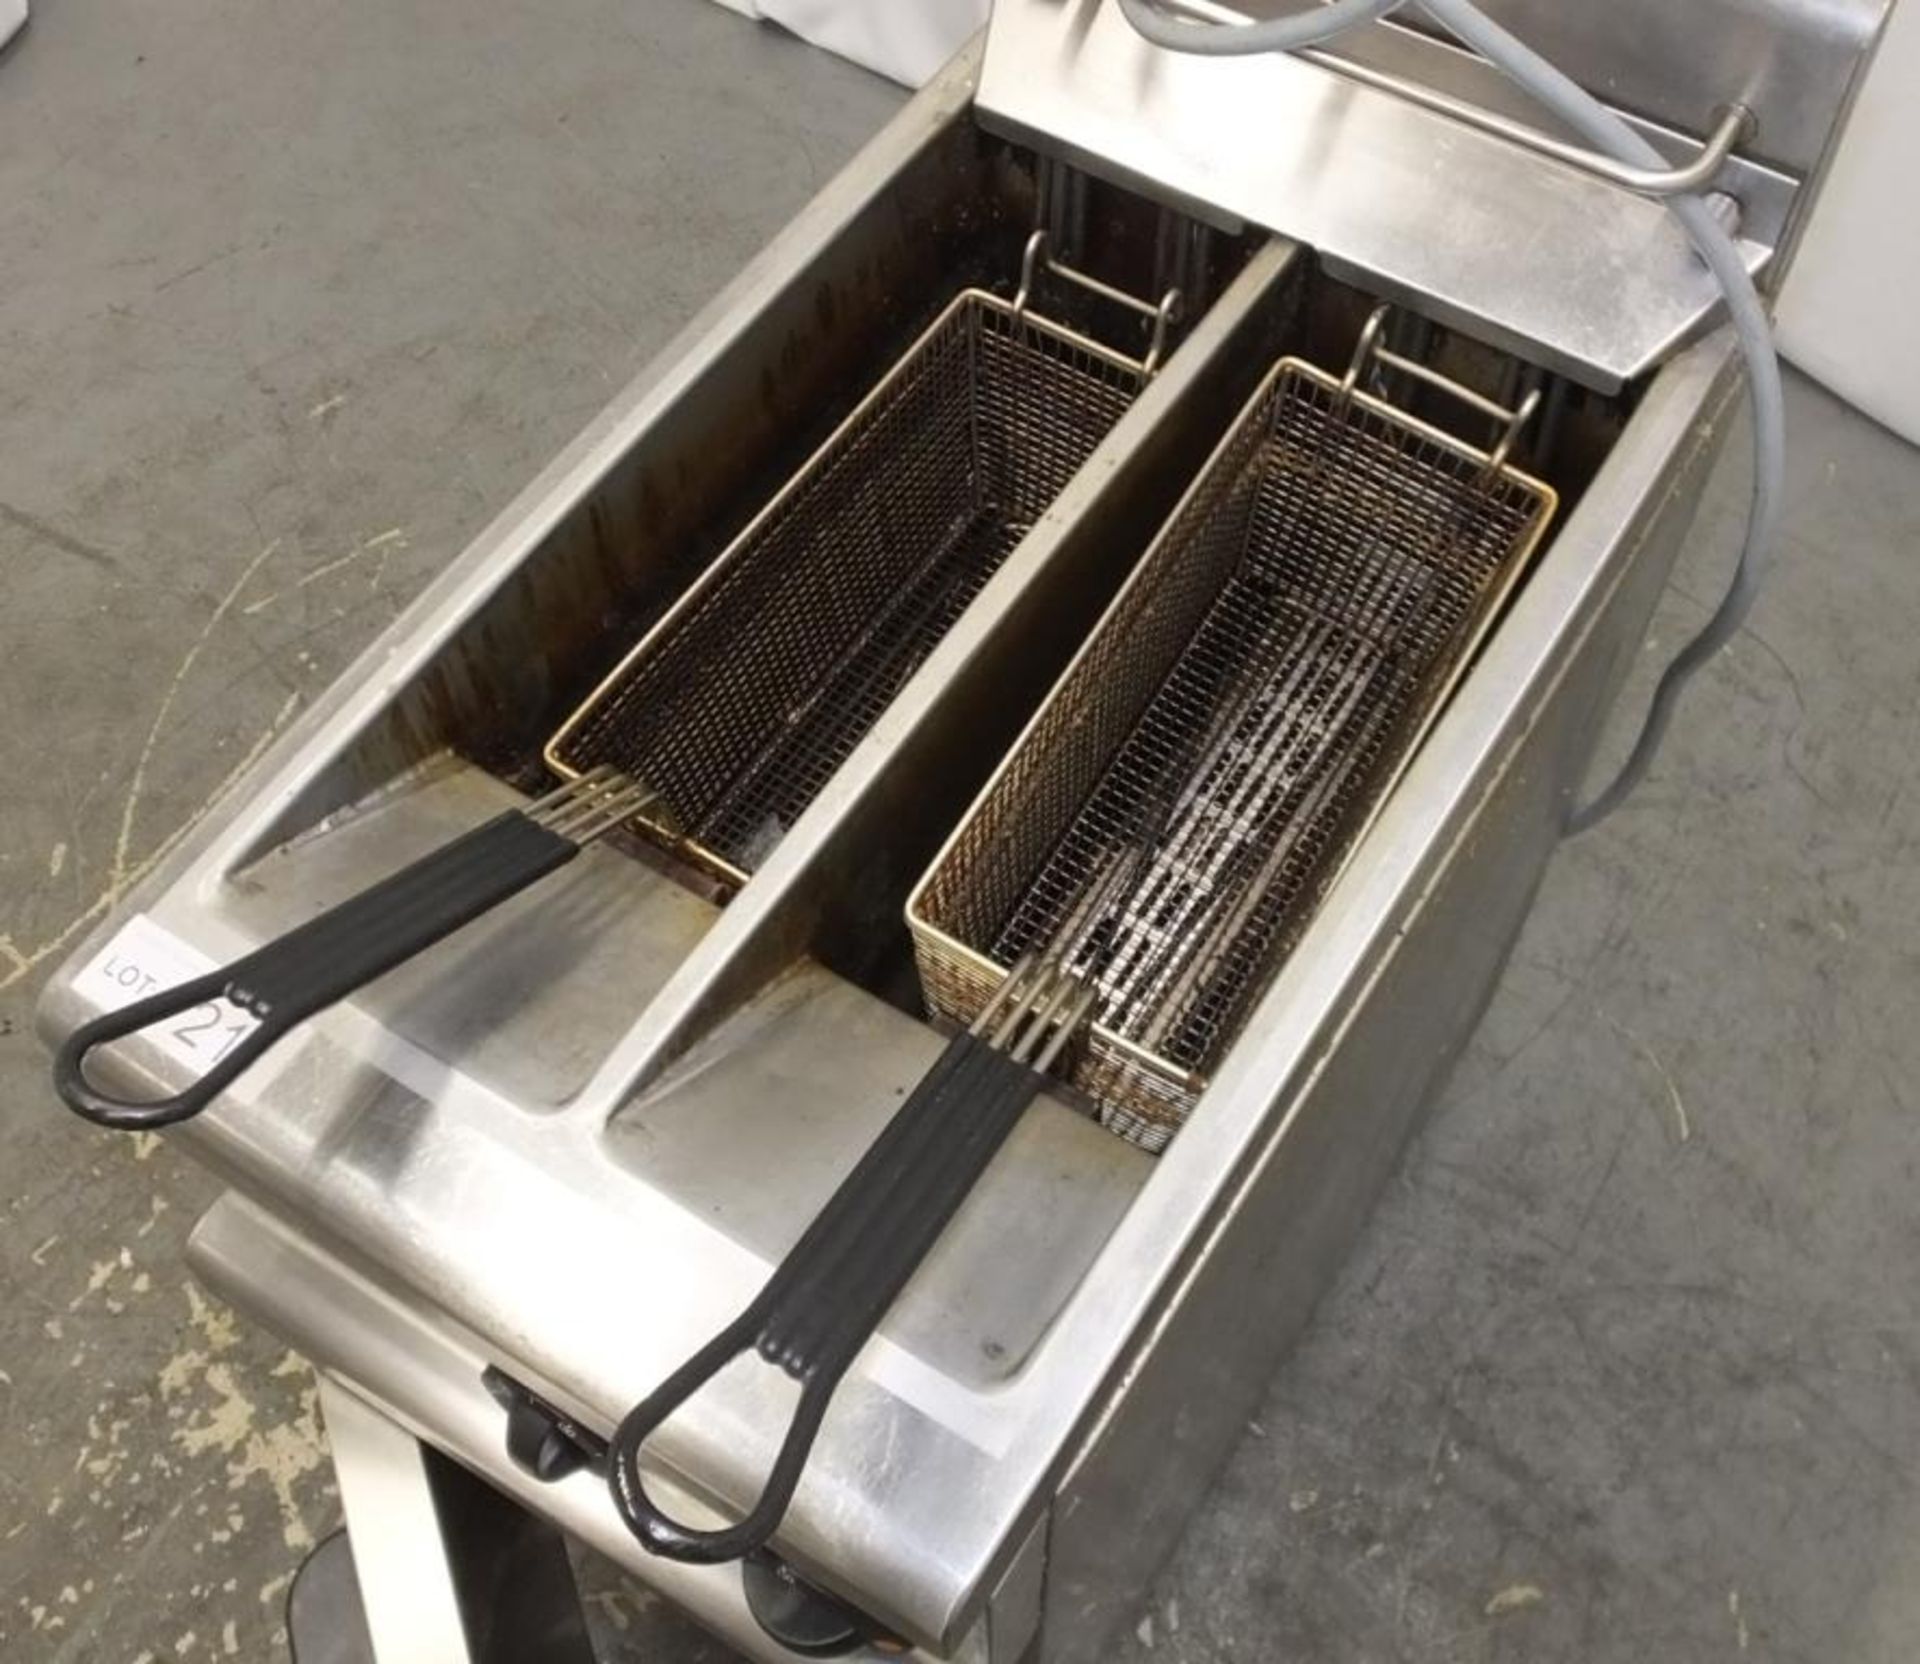 Lincat double basket fryer - OE7105/F - 415V - W 400mm x D 730 x H 930mm - Image 3 of 6